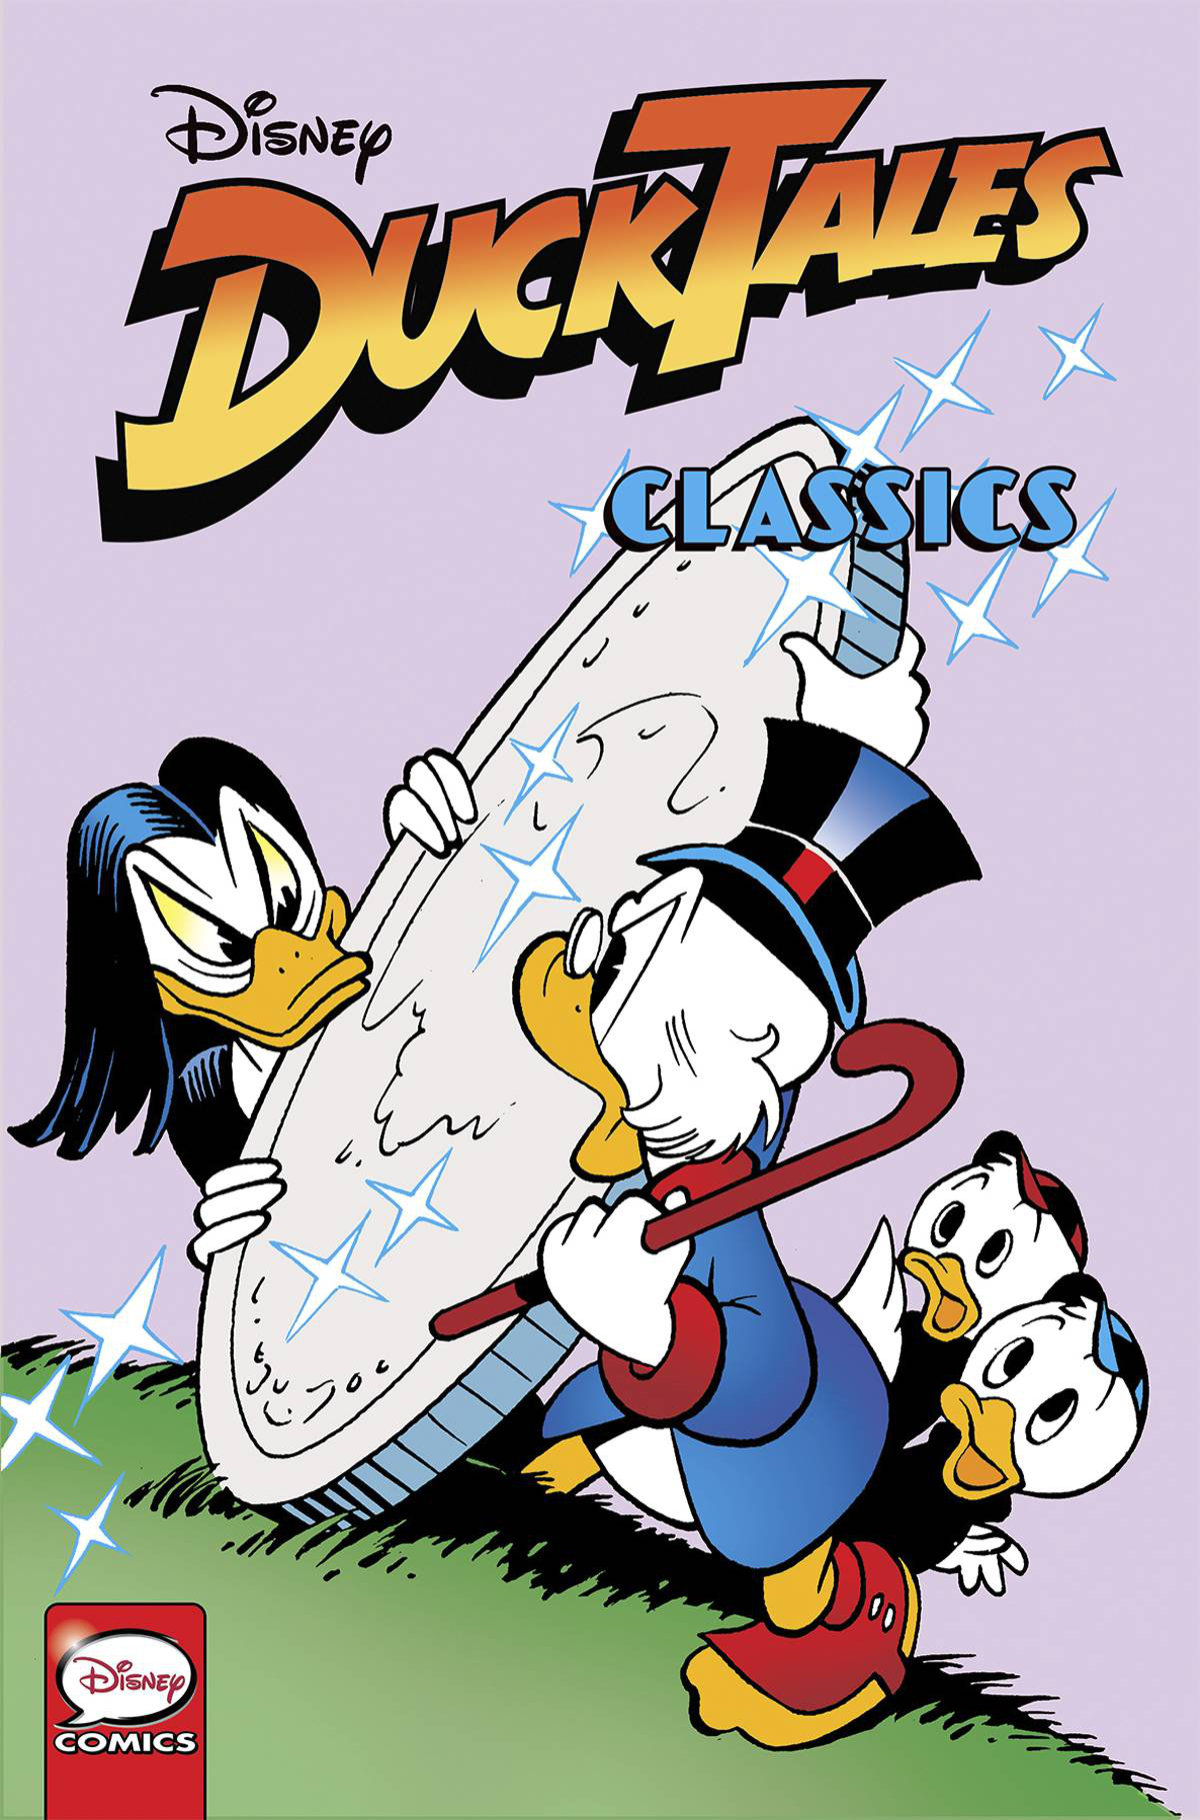 Wednesday is Like a Hurricane With Ducktales Classics – Atomik Pop!